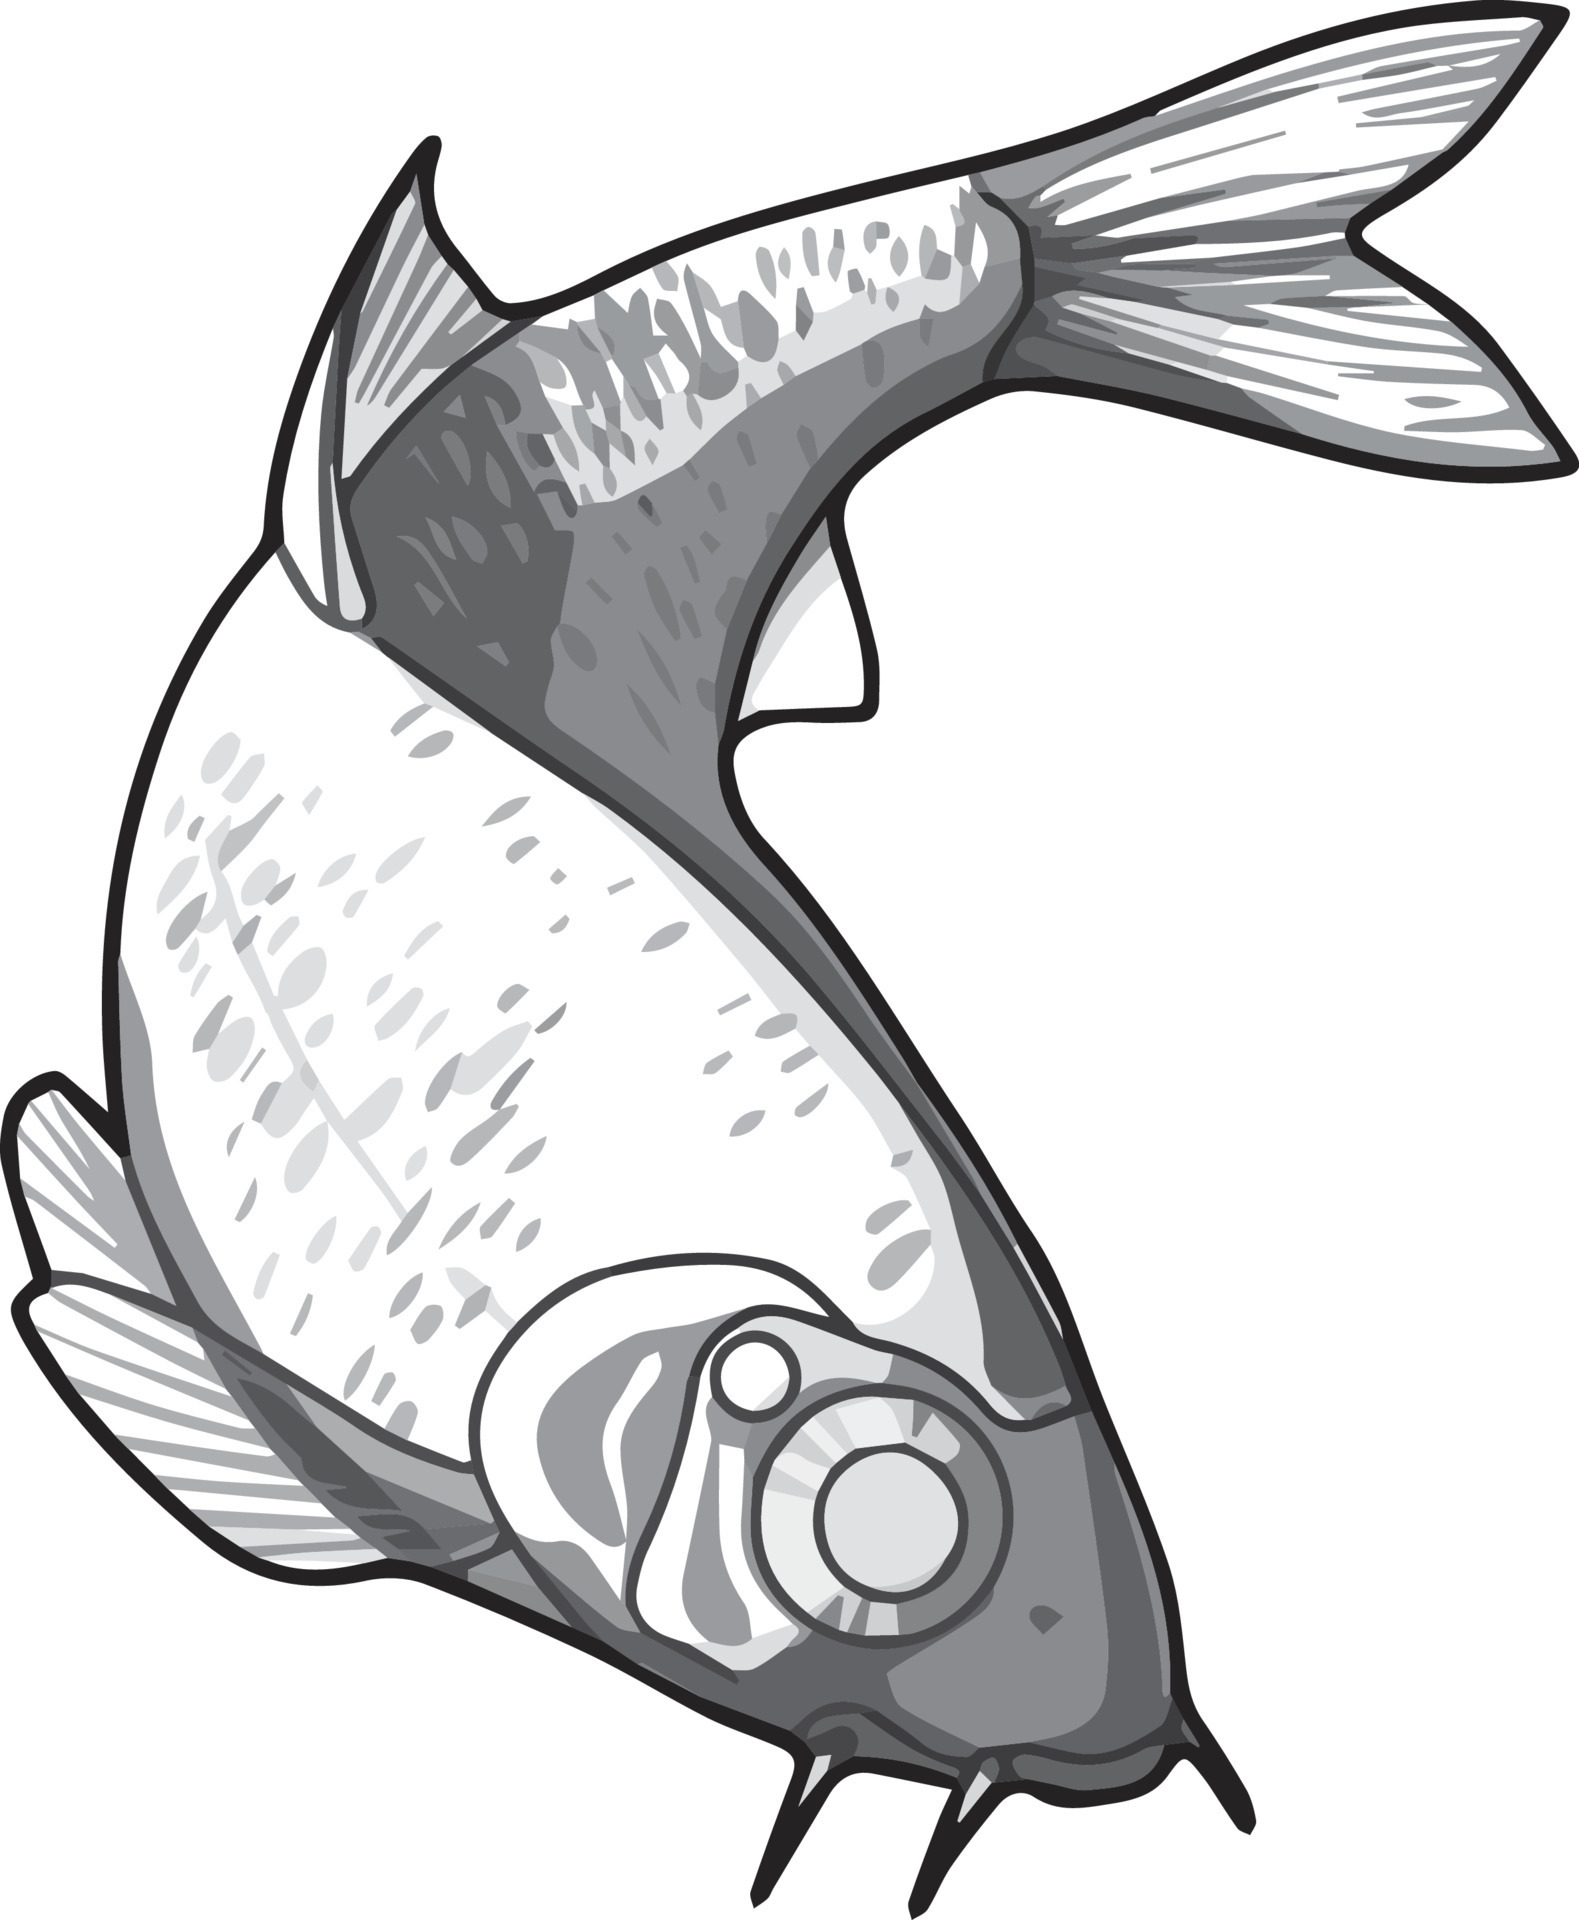 Cute fish cartoon coloring page for kids Vector Image